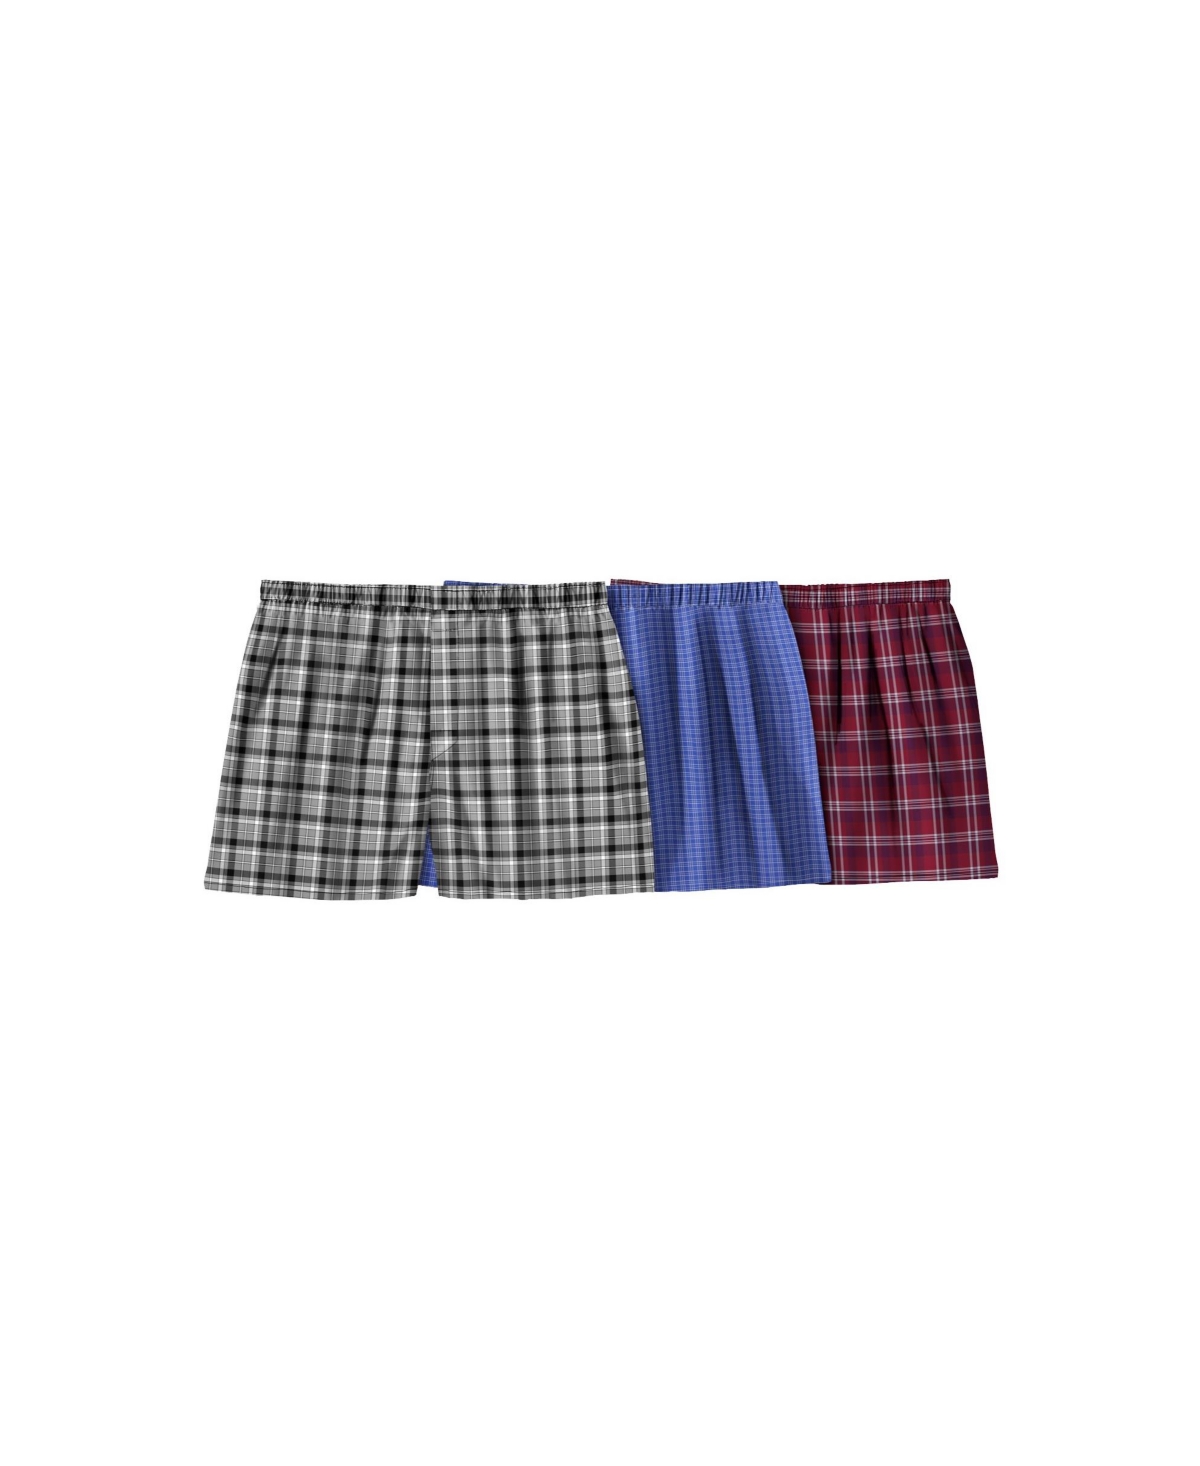 Big & Tall Woven Boxers 3-Pack - Assorted colors